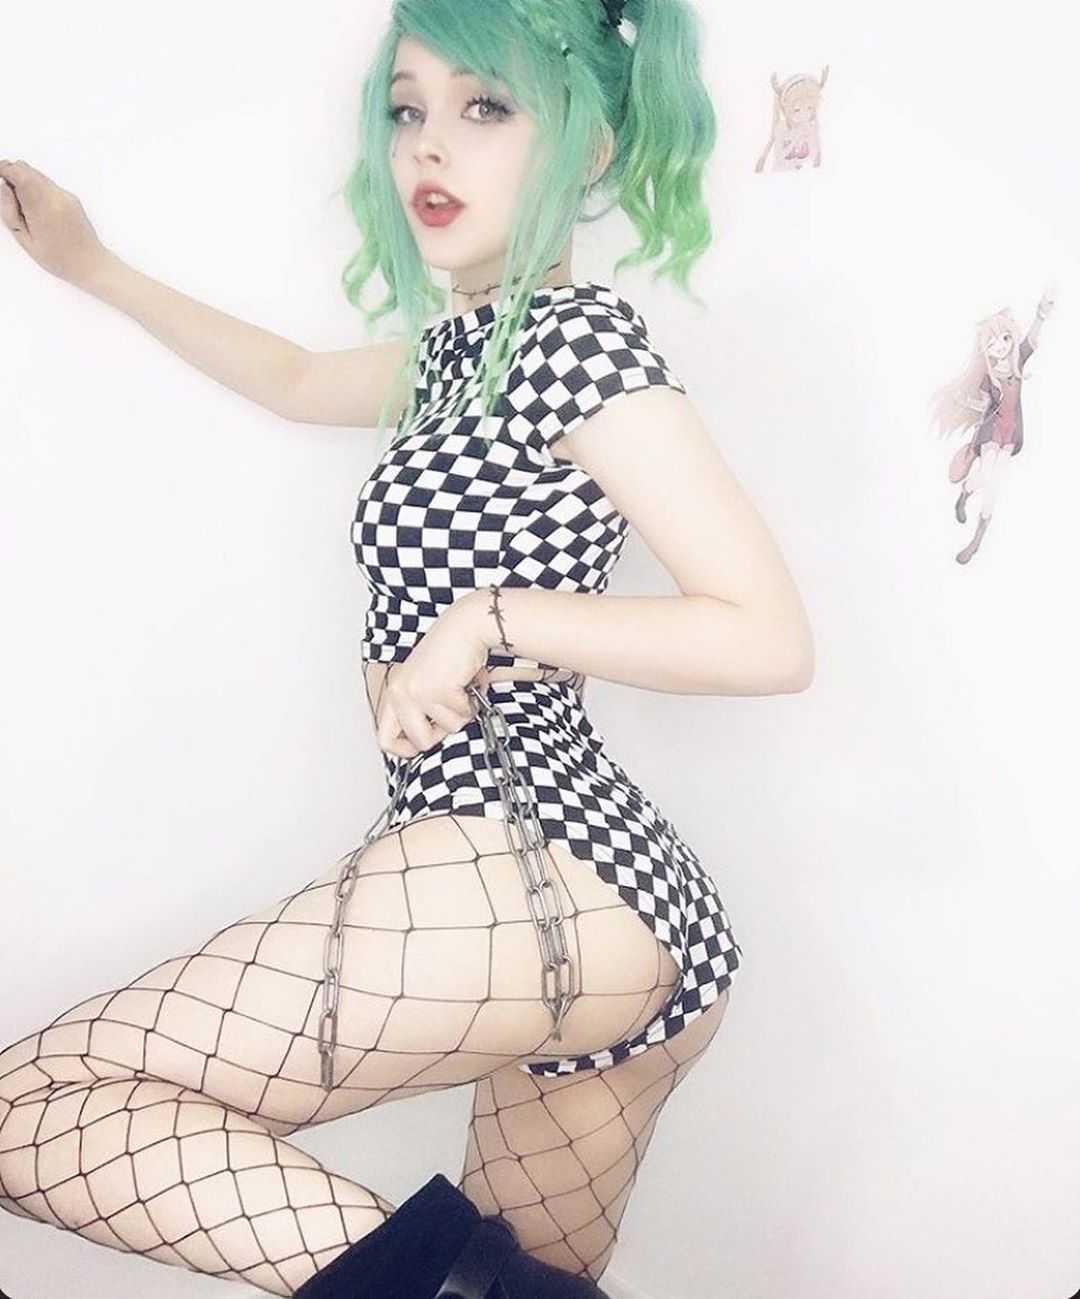 51 Sexy Belle Delphine Boobs Pictures Will Heat Up Your Blood With Fire And Energy For This Sexy Diva 61